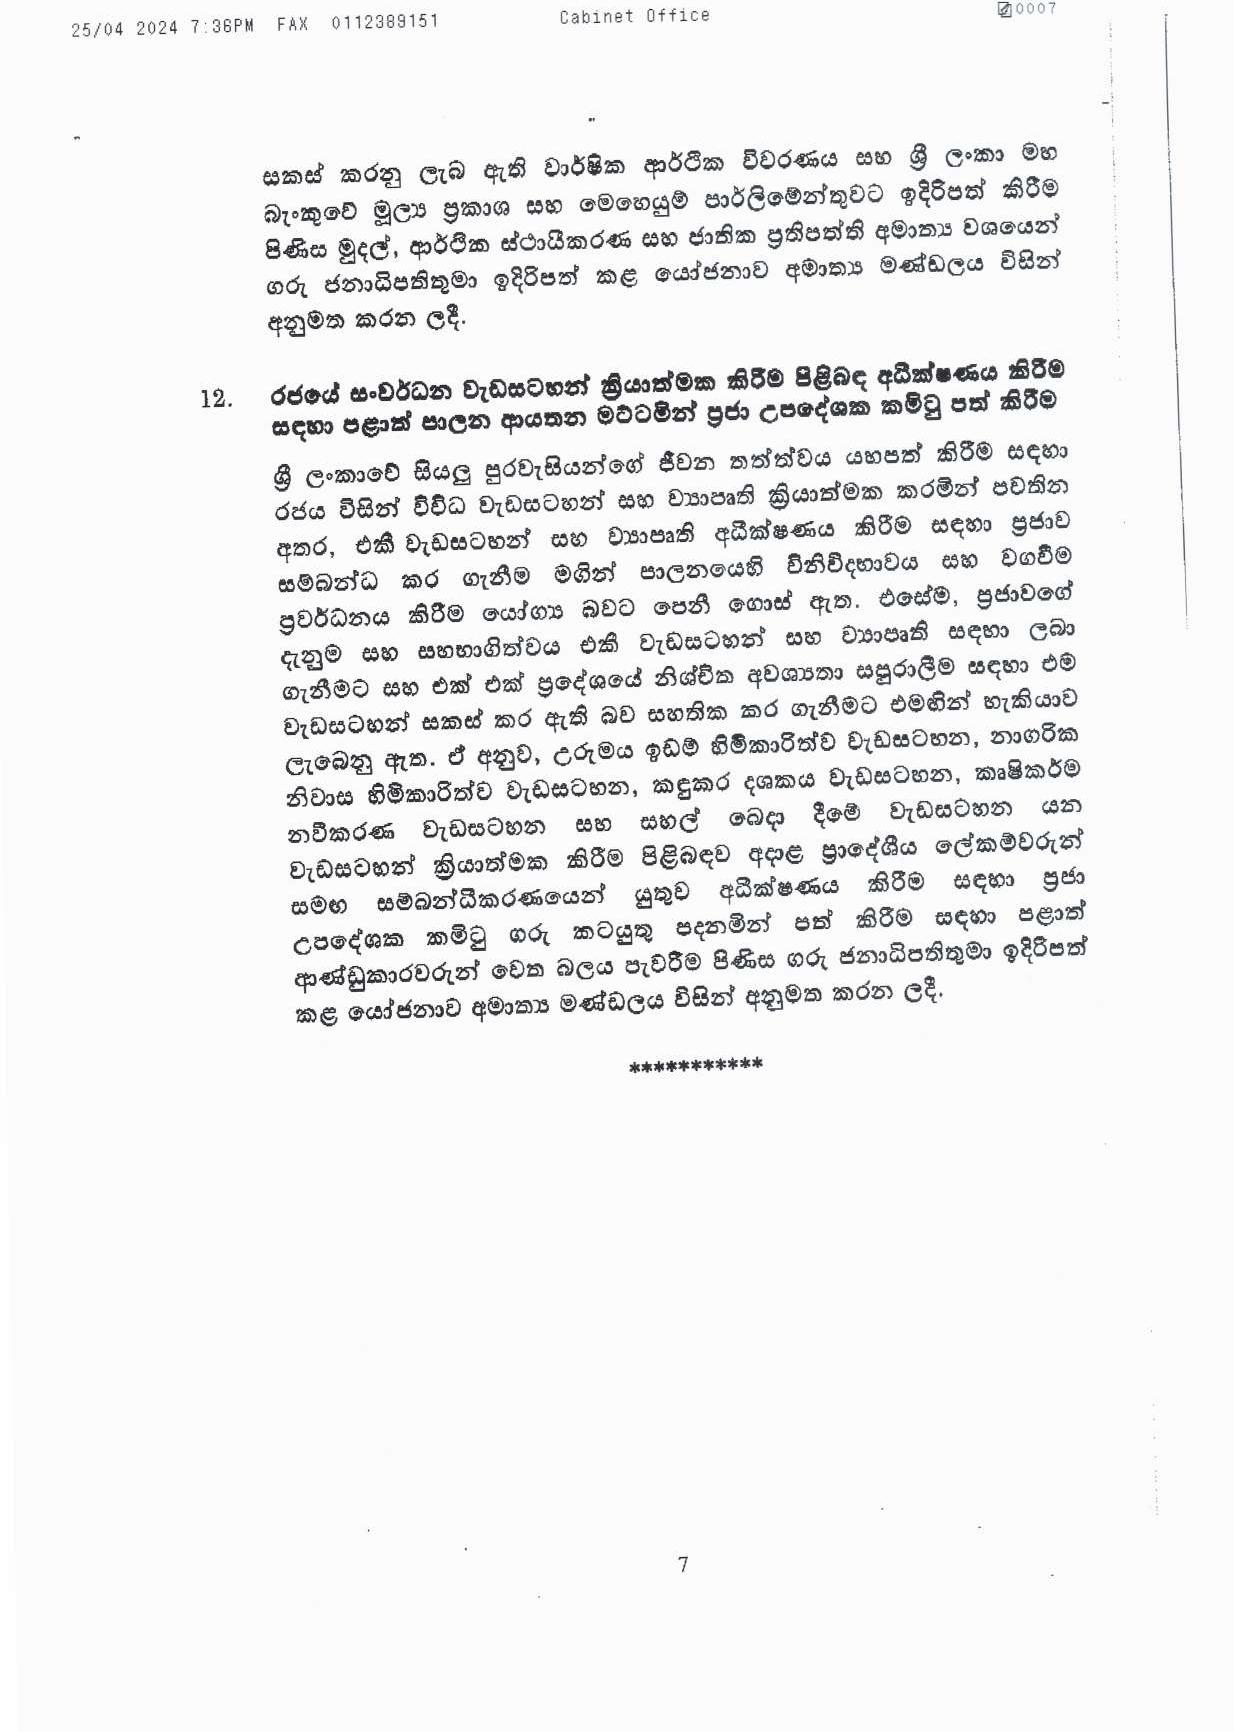 Cabinet Decision on 25.04.2024 page 007